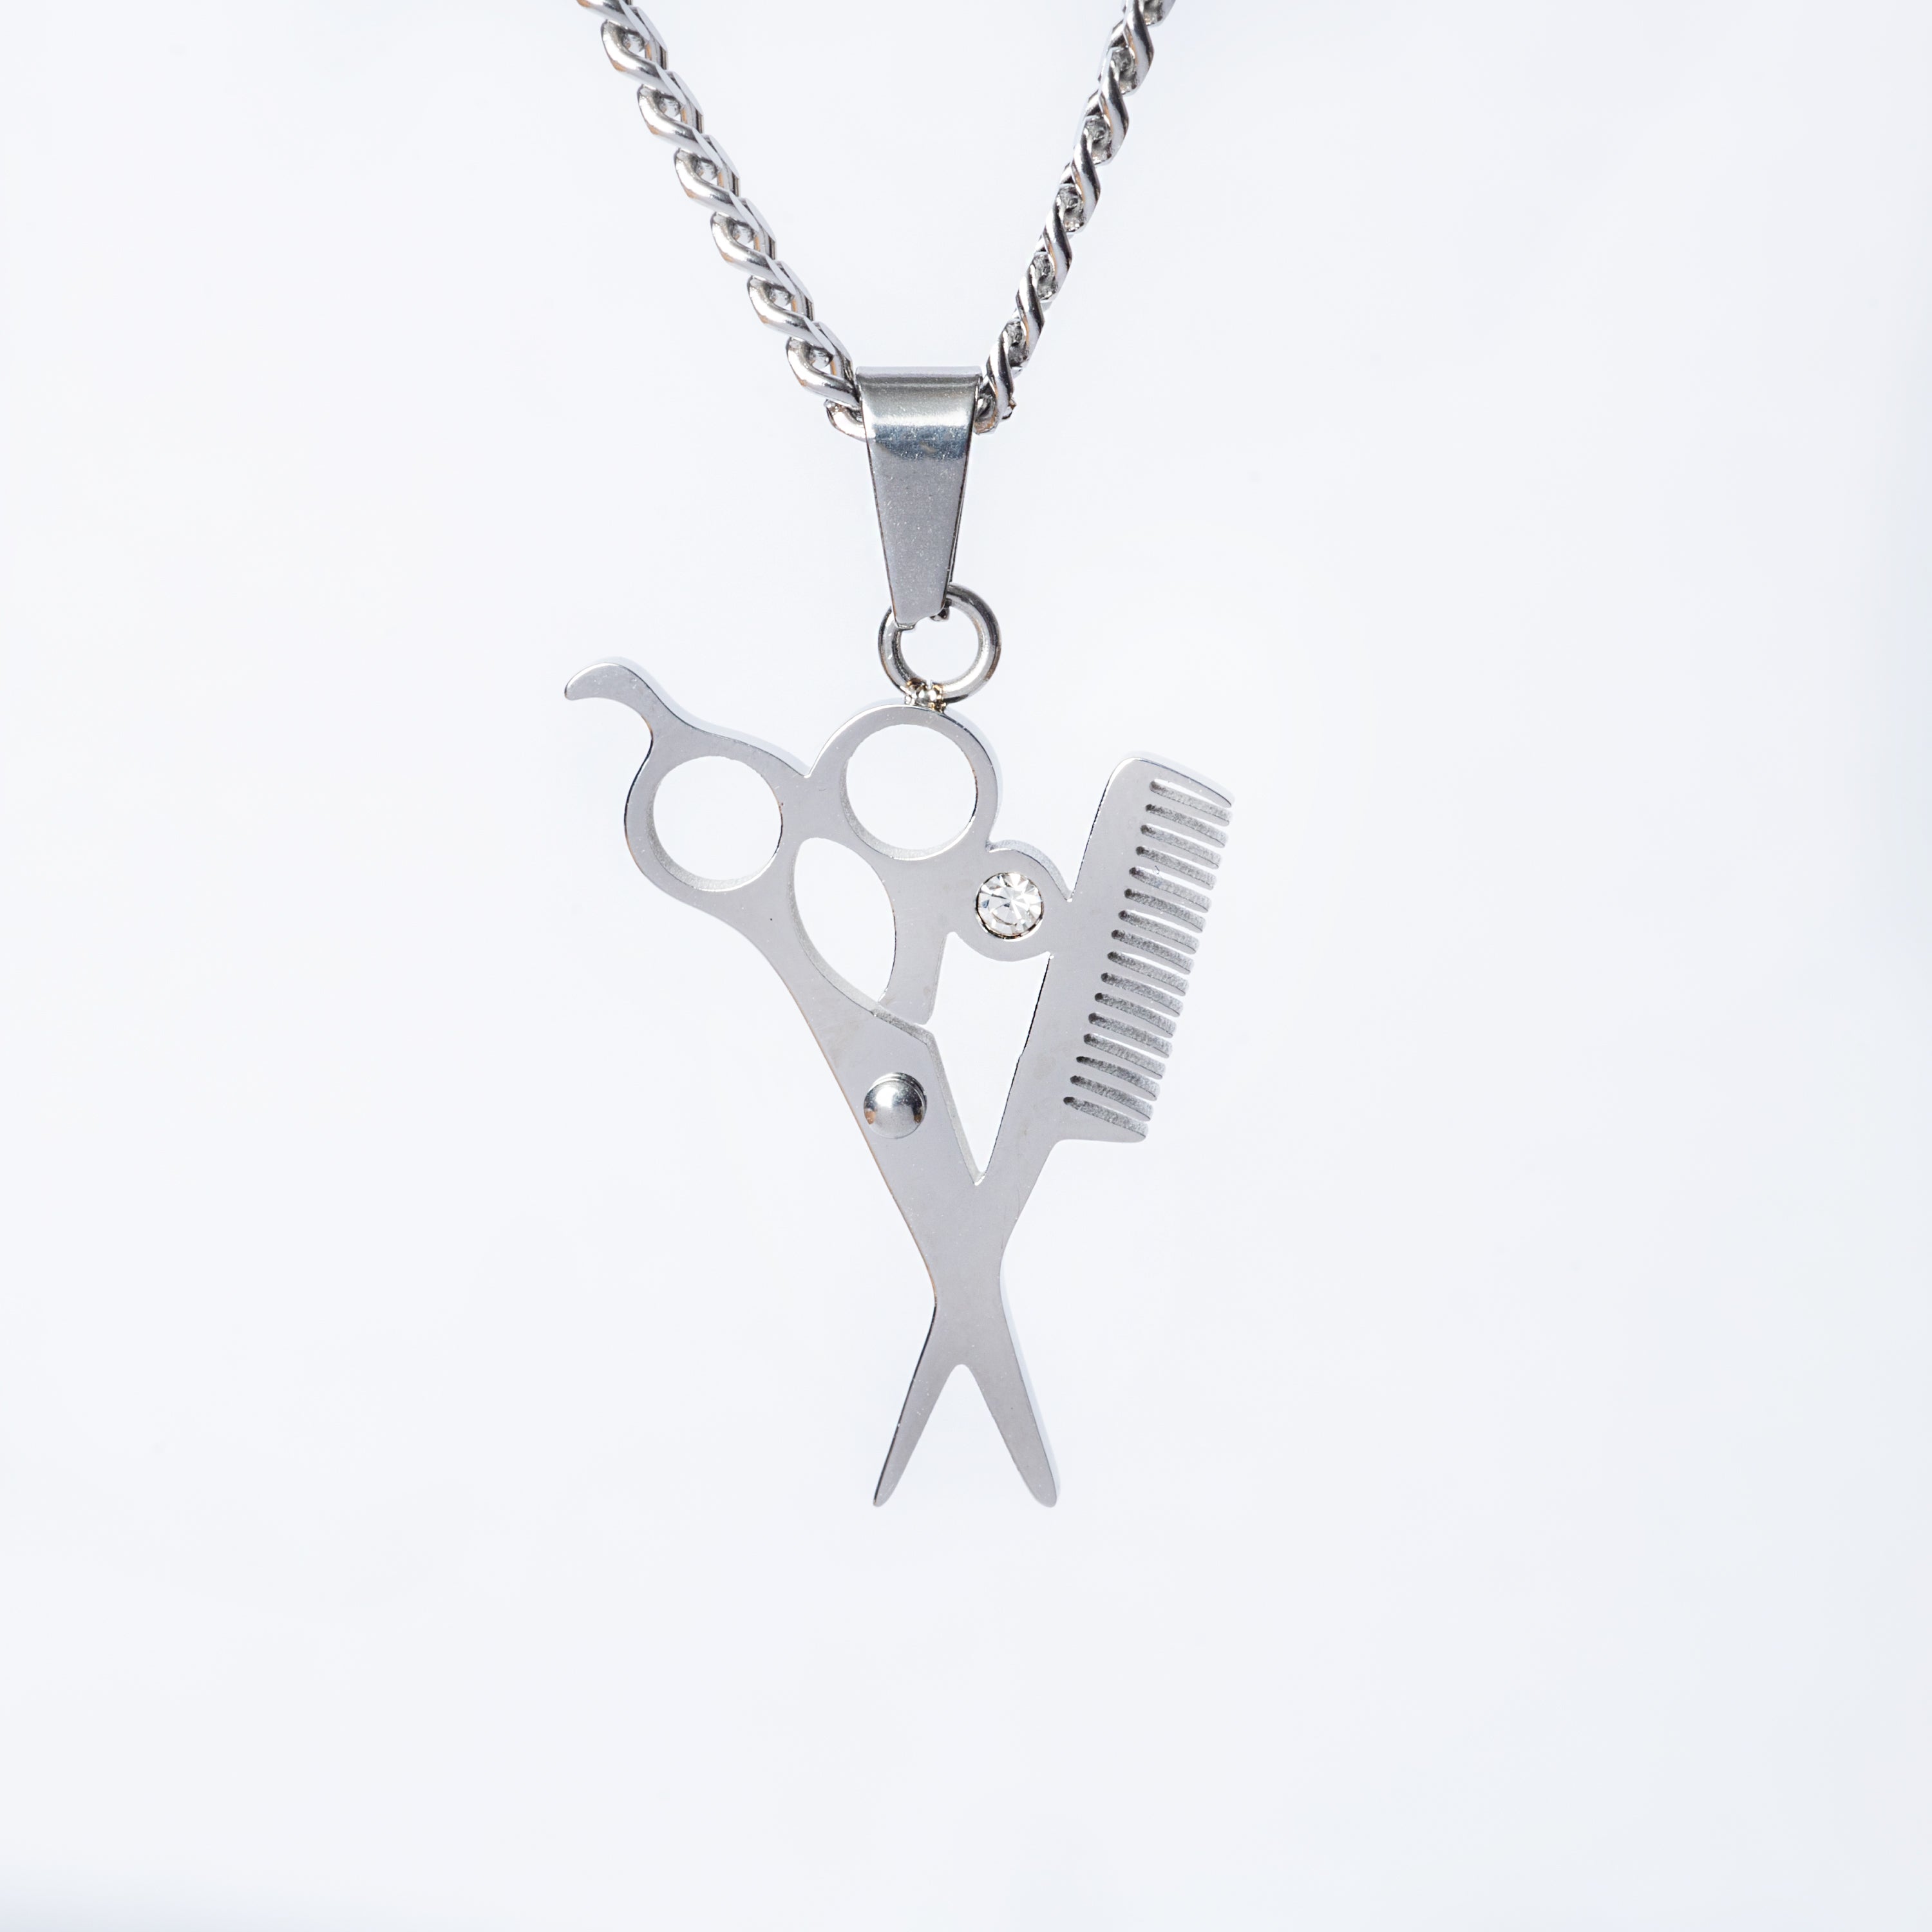 The Hairdresser Necklace